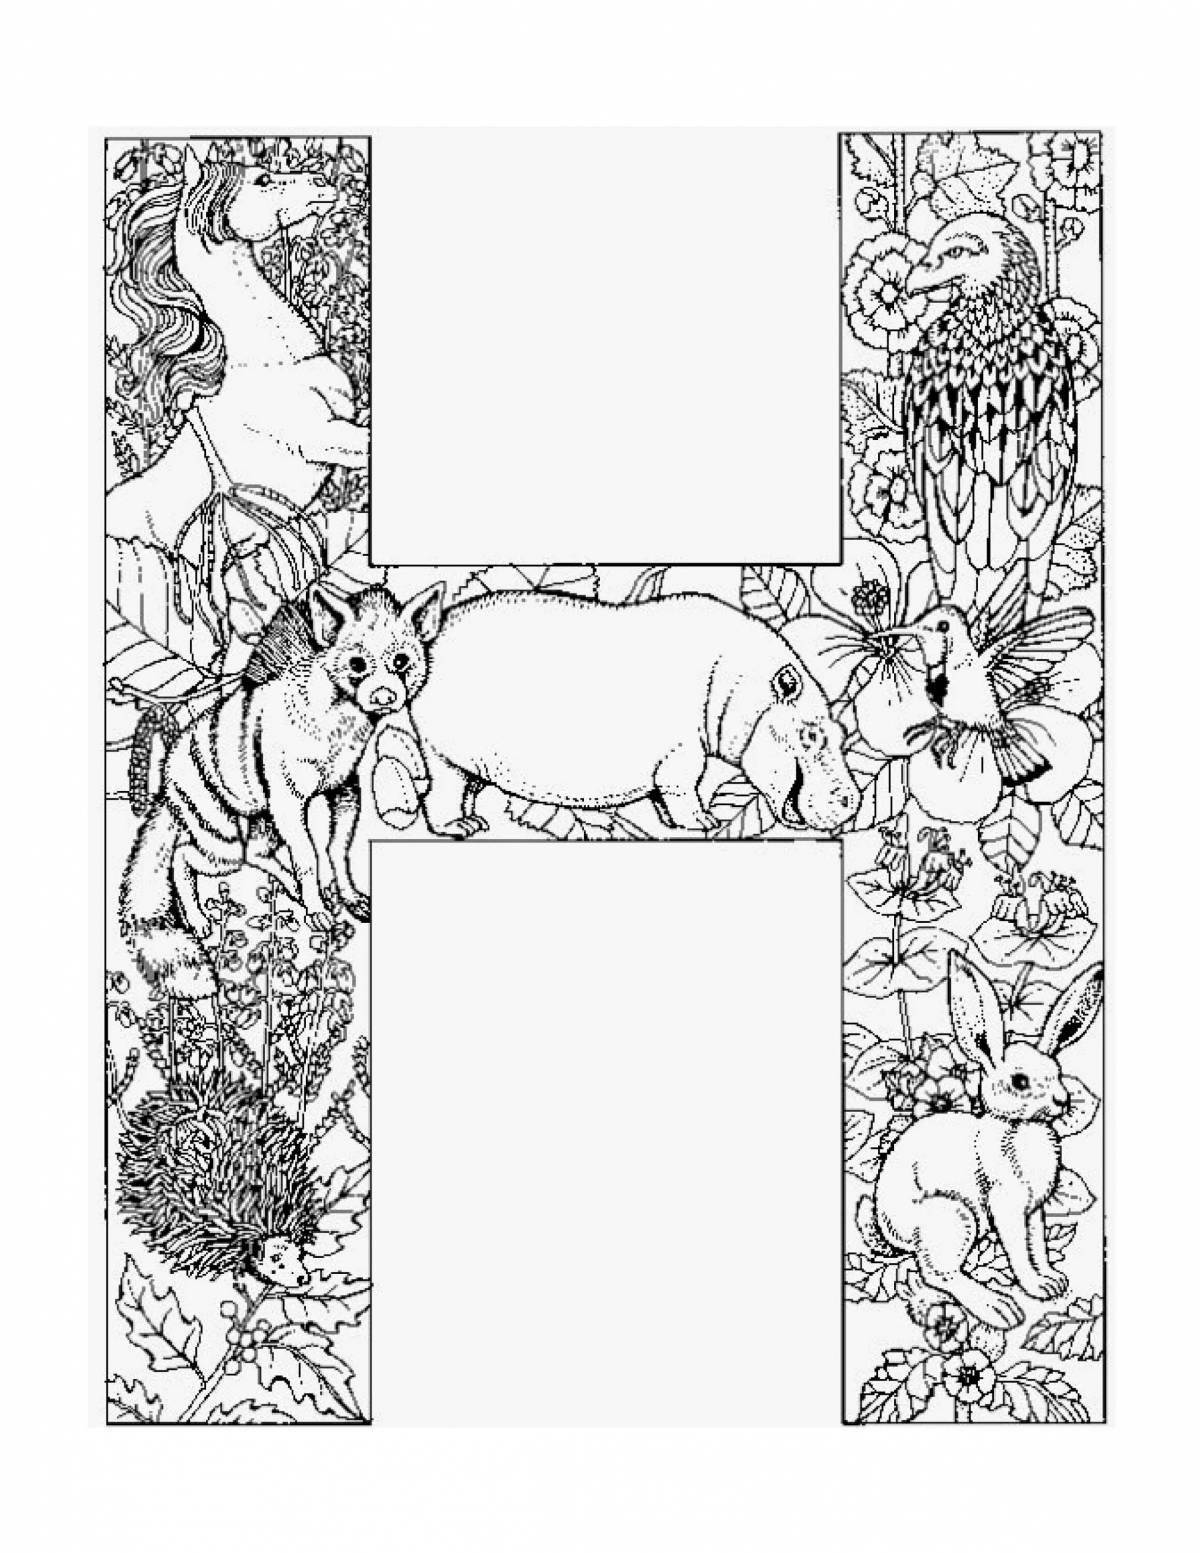 Charming letter n coloring book